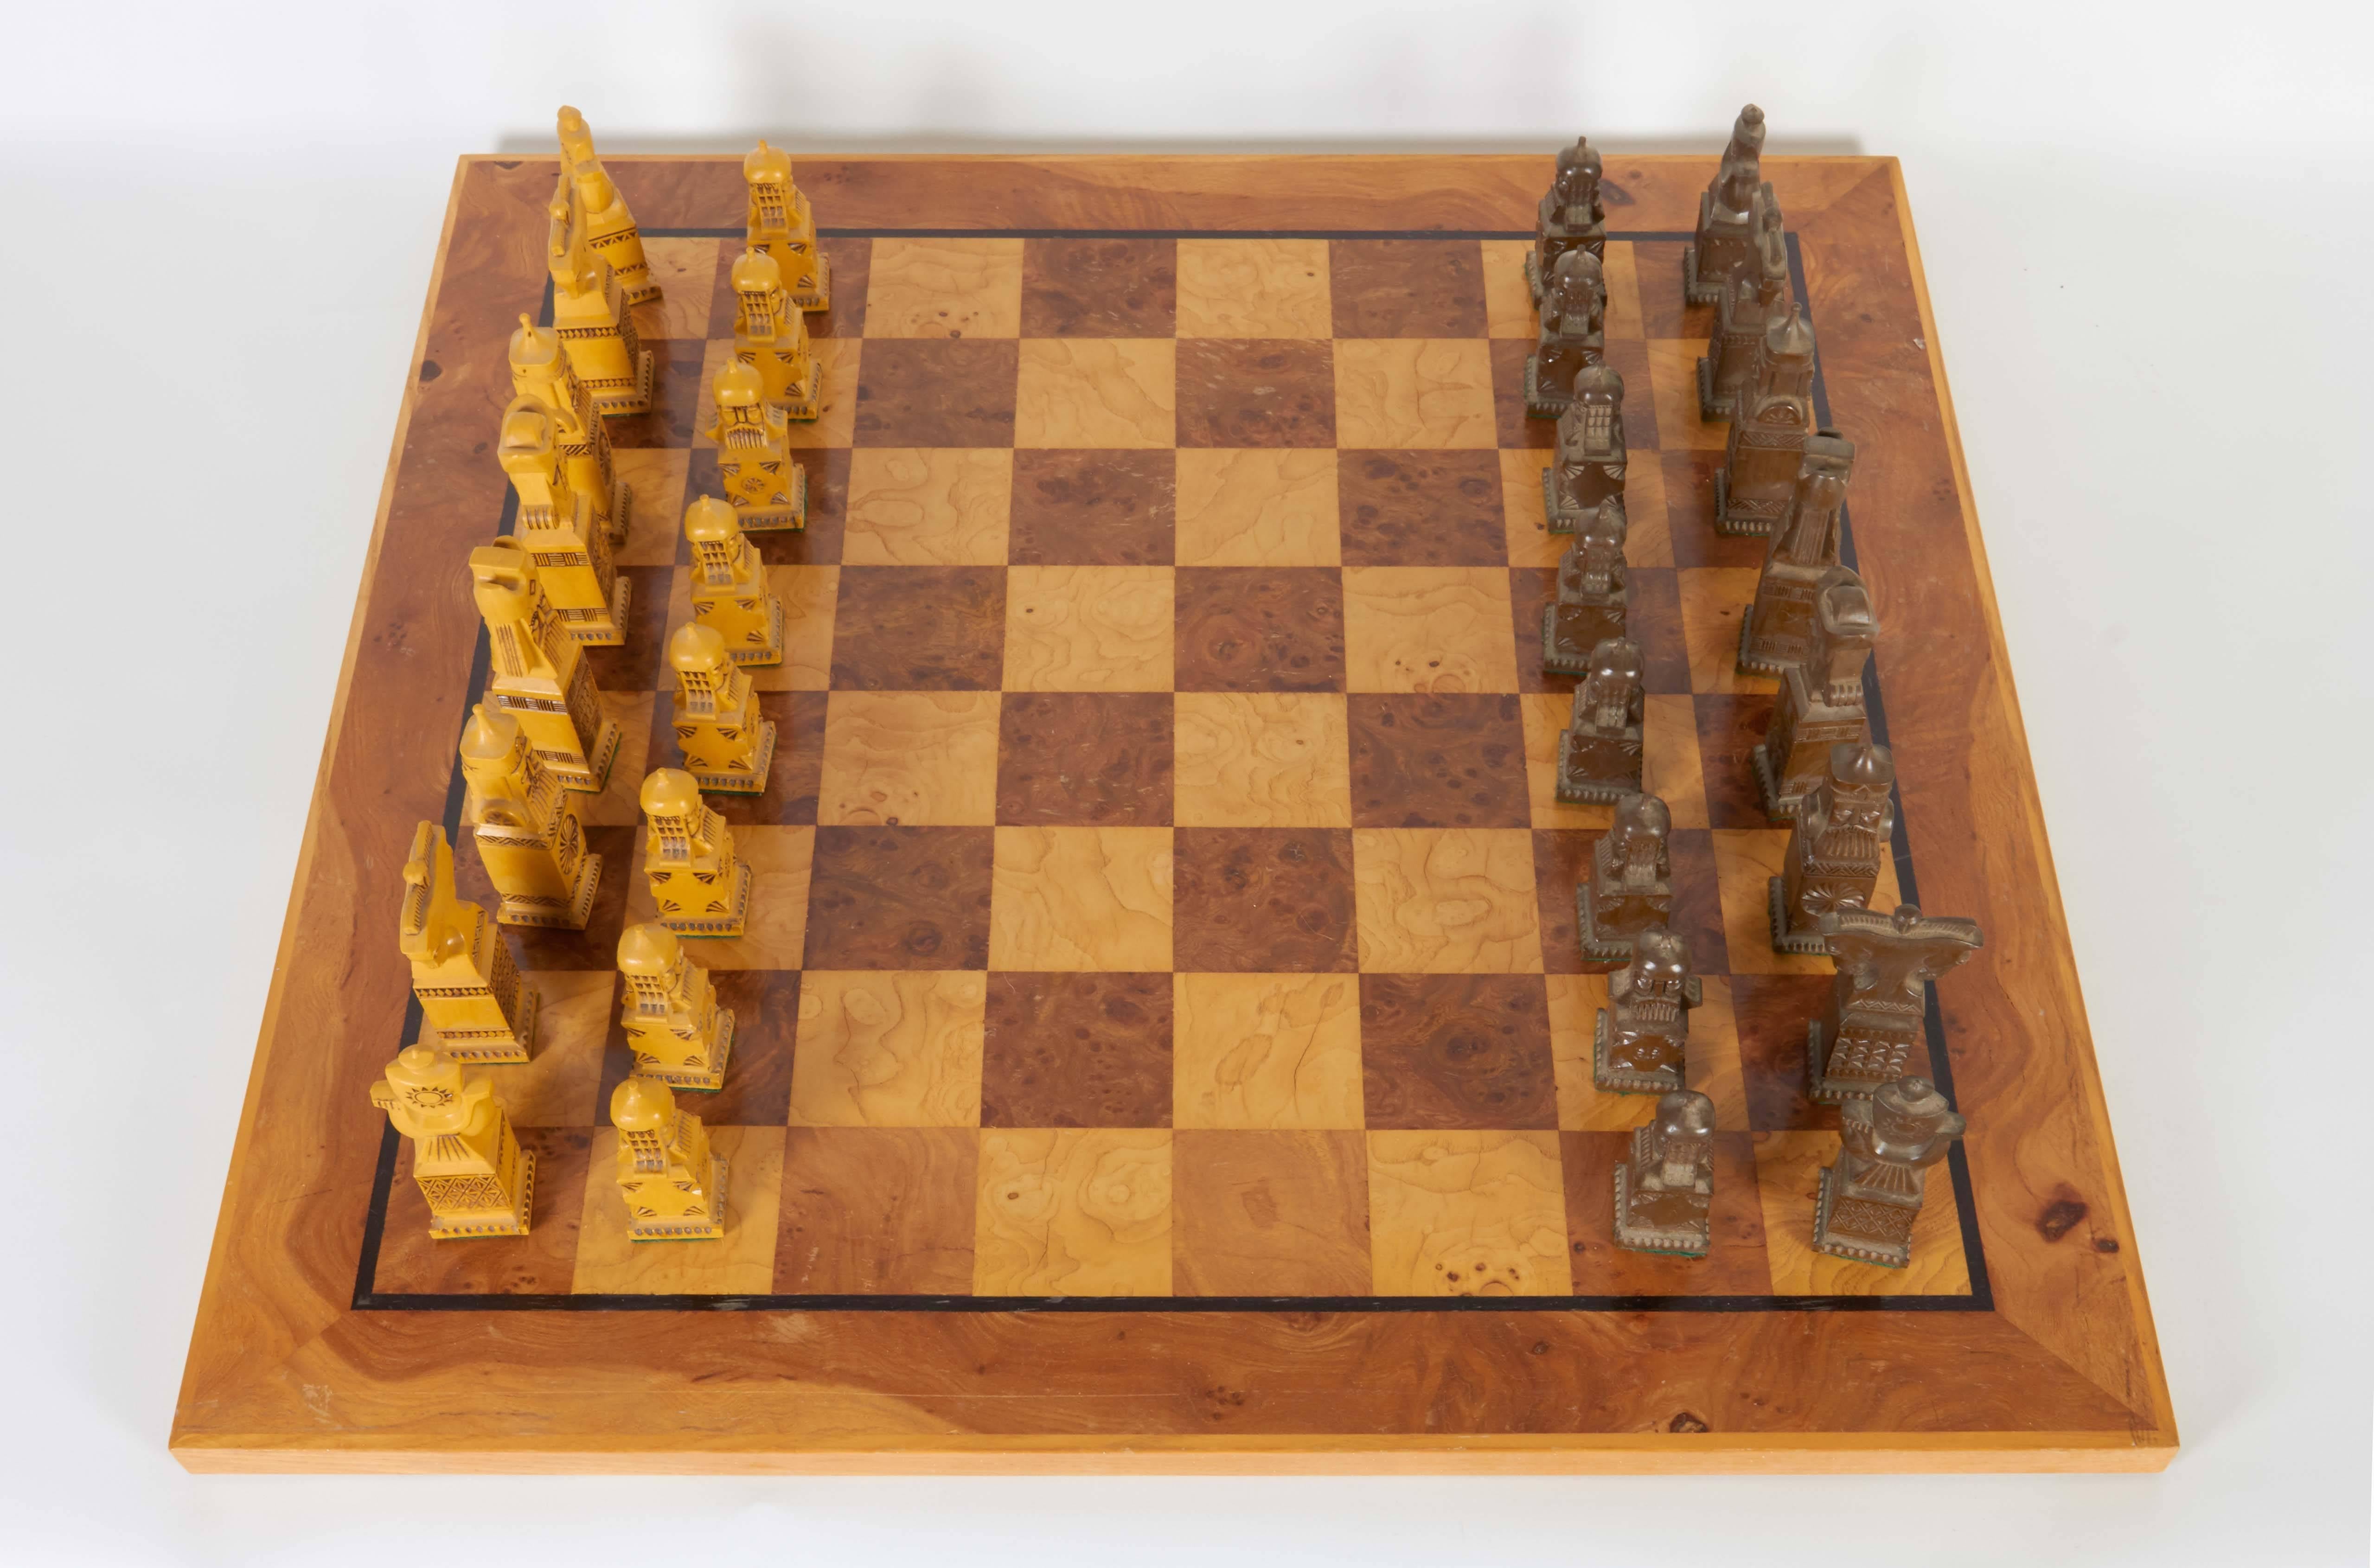 A circa 1970s chess set, including intricately detailed Russian pieces, reminiscent of Folk Art styles, in tan and brown resin, on a burl wood chessboard (produced in the United States); includes original box. Very good vintage condition, wear